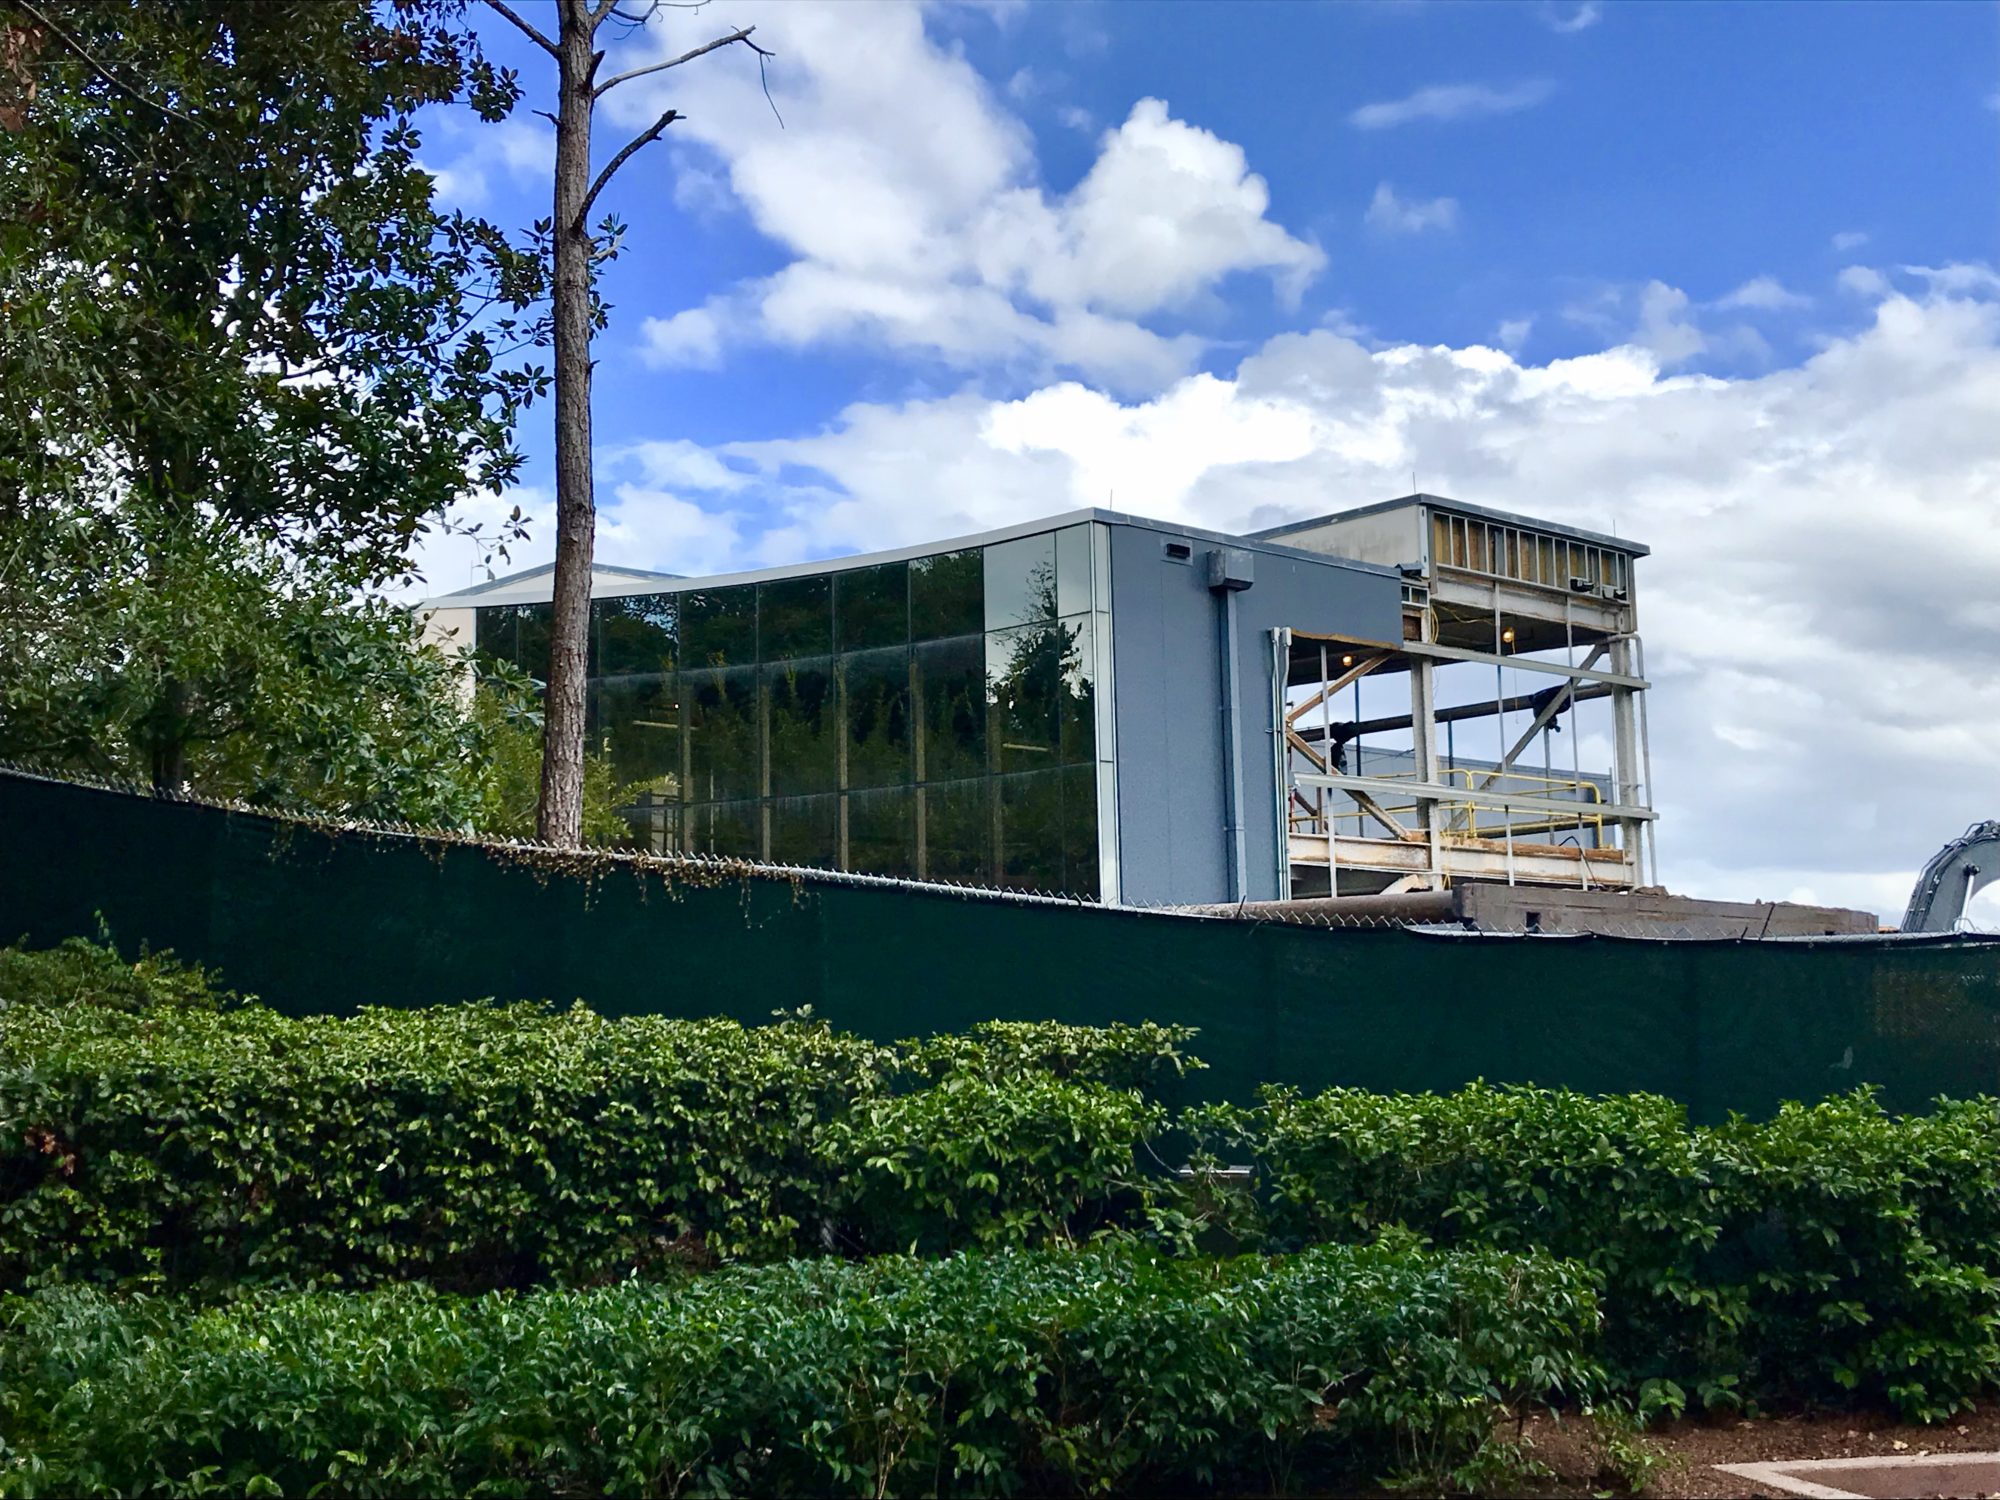 Space-Themed Restaurant is Taking Shape at Epcot